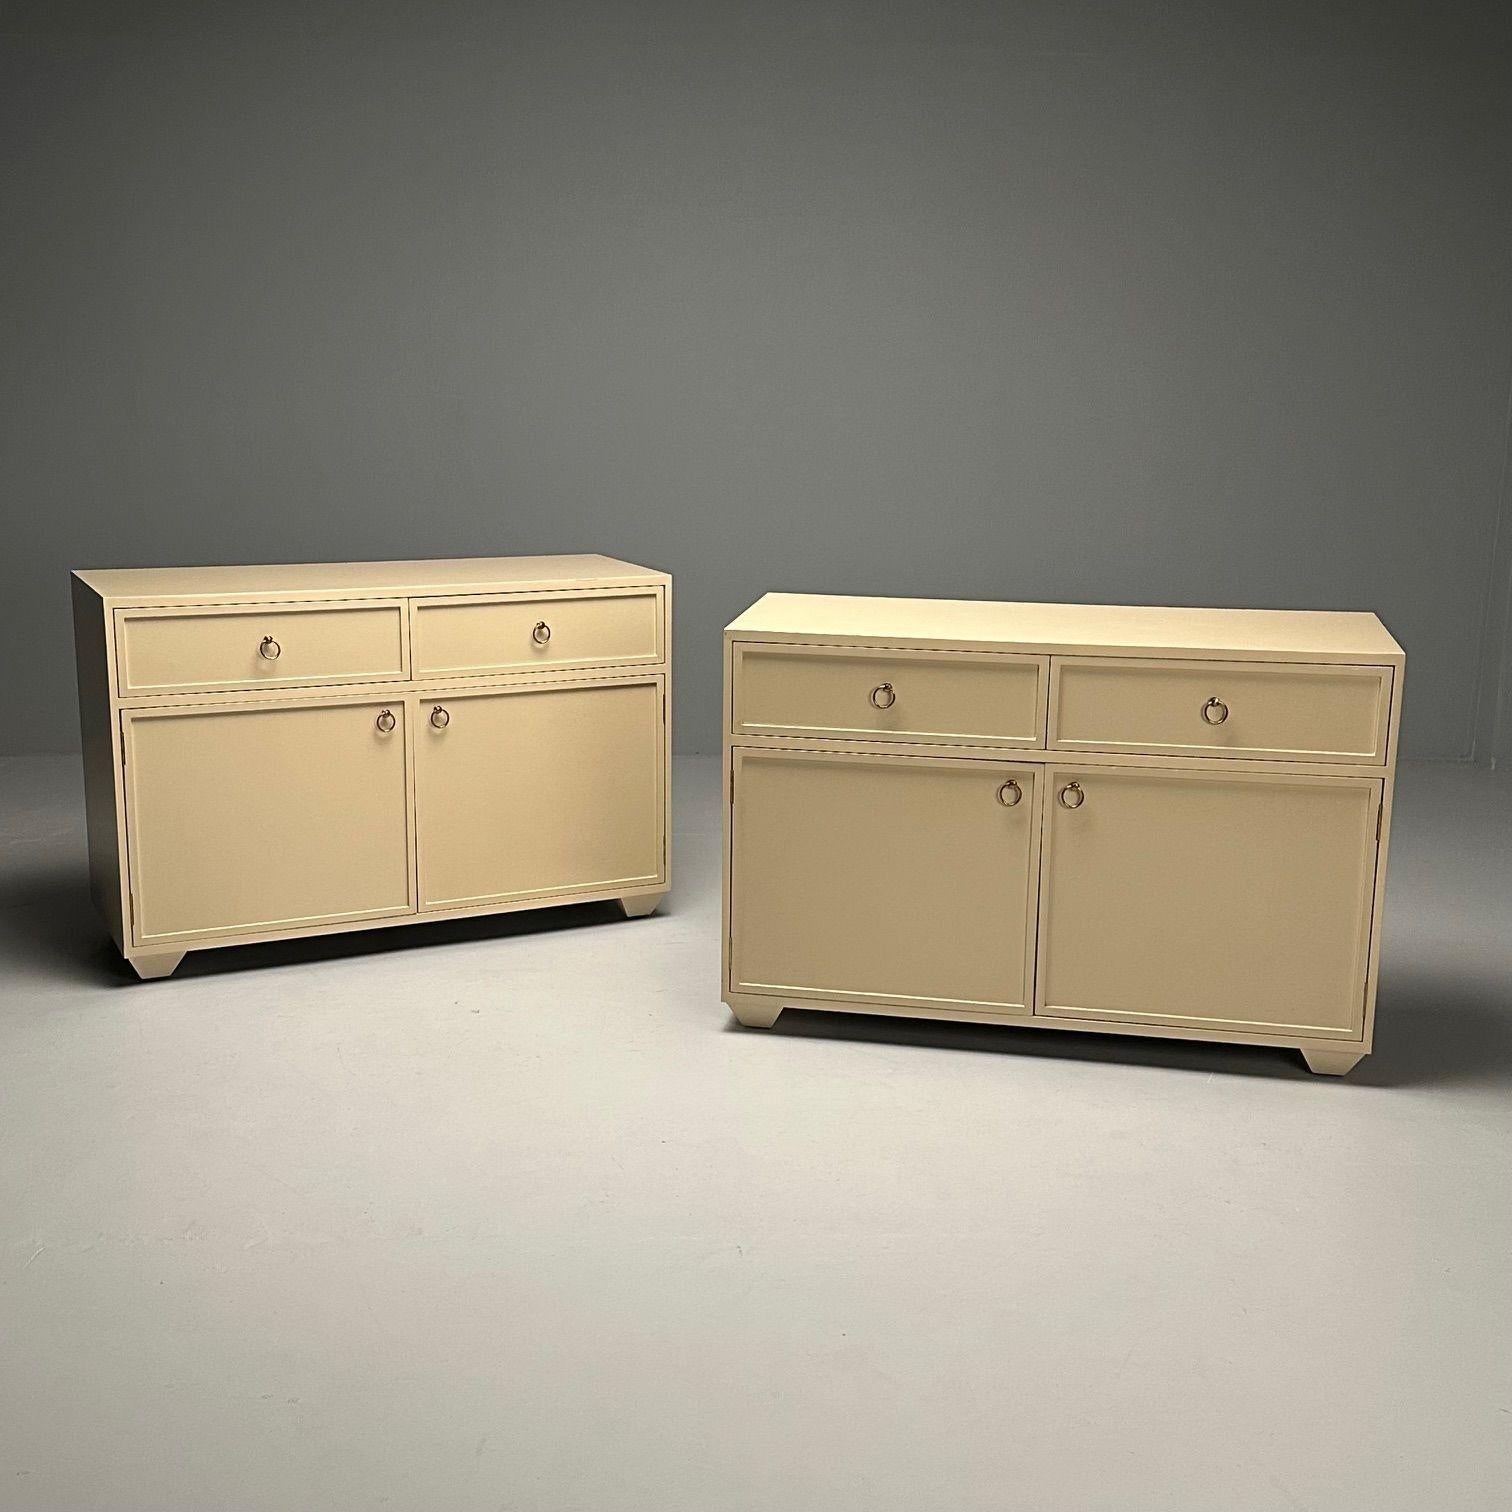 EJ Victor, Modern, 'Jackie Buffet' Cabinets, Off White Lacquer, Brass, 2000s
Pair of Jackie Buffets by E J Victor for Jack Fhillips. These cabinets retail at $5,985 each. Each with a pair of shelved interior double doors under drawers. White